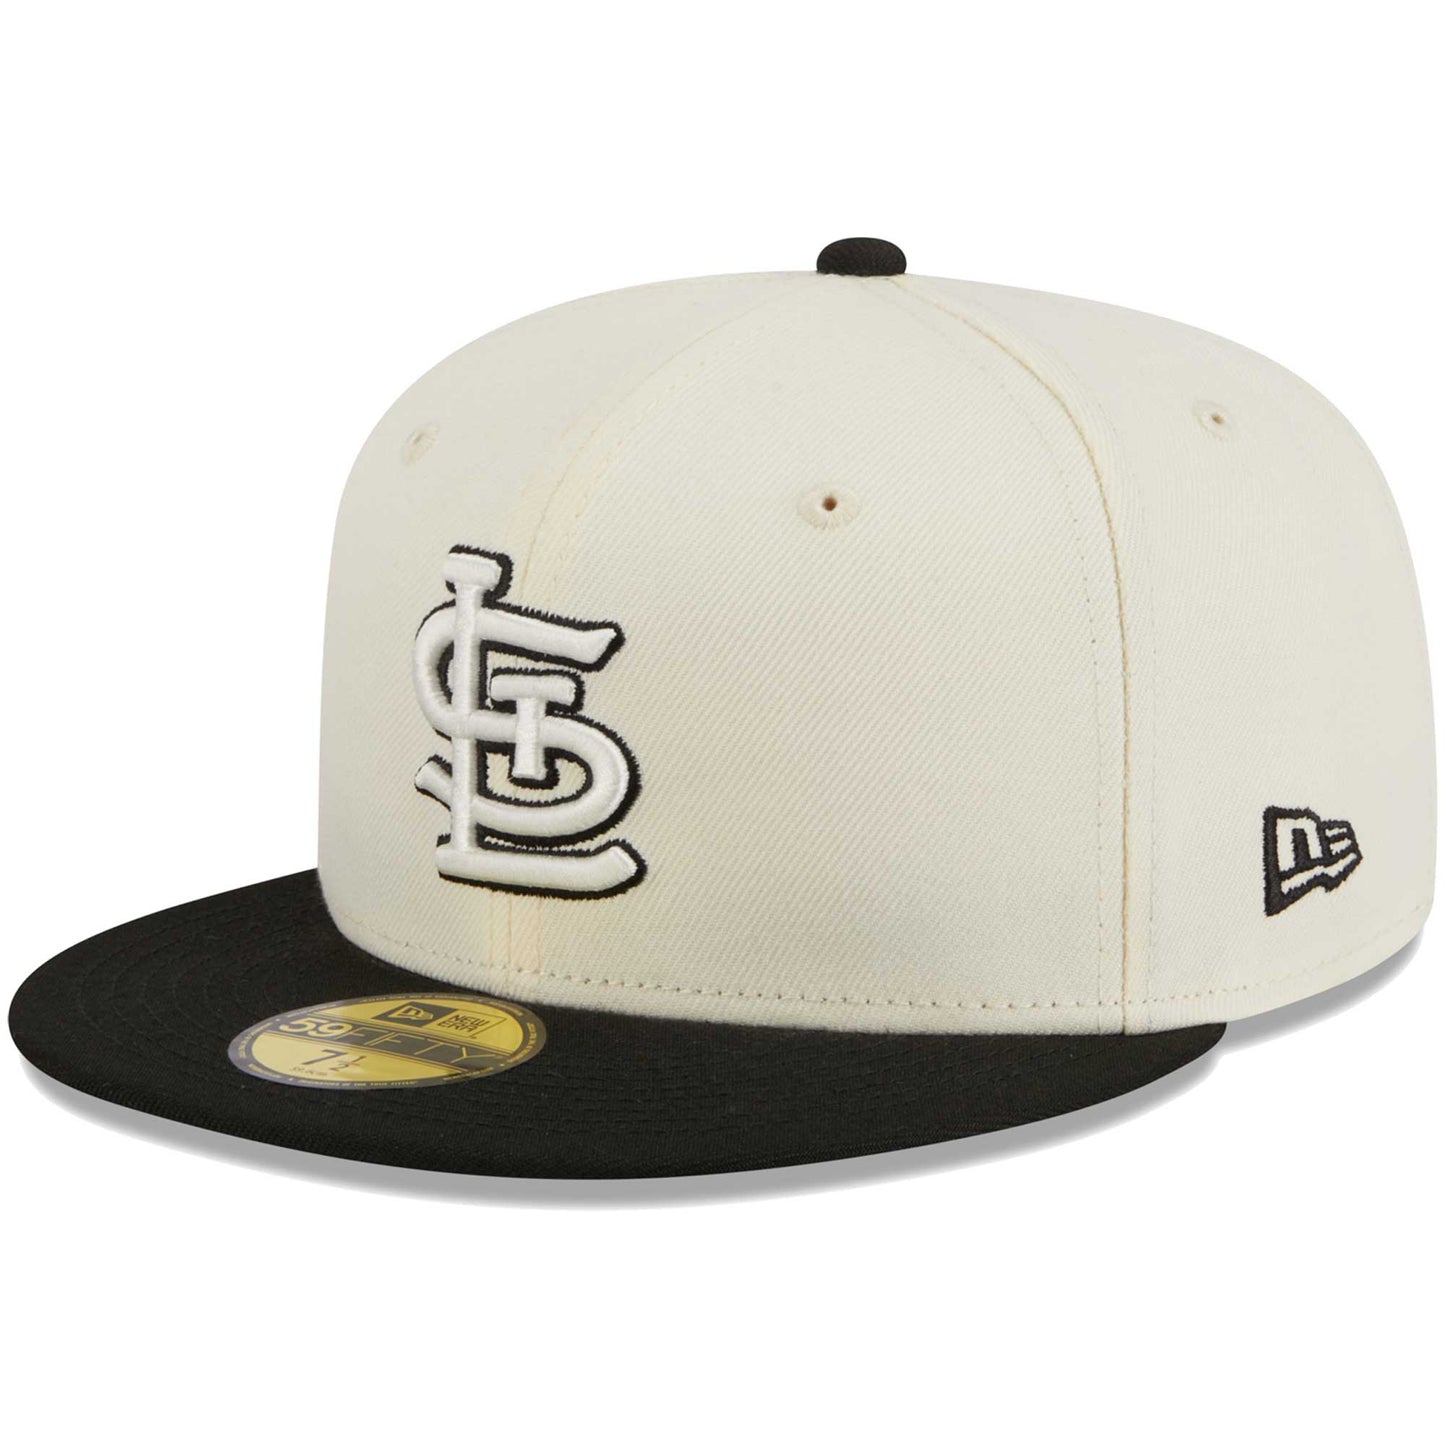 St. Louis Cardinals New Era Chrome 59FIFTY Fitted Hat - Stone/Black